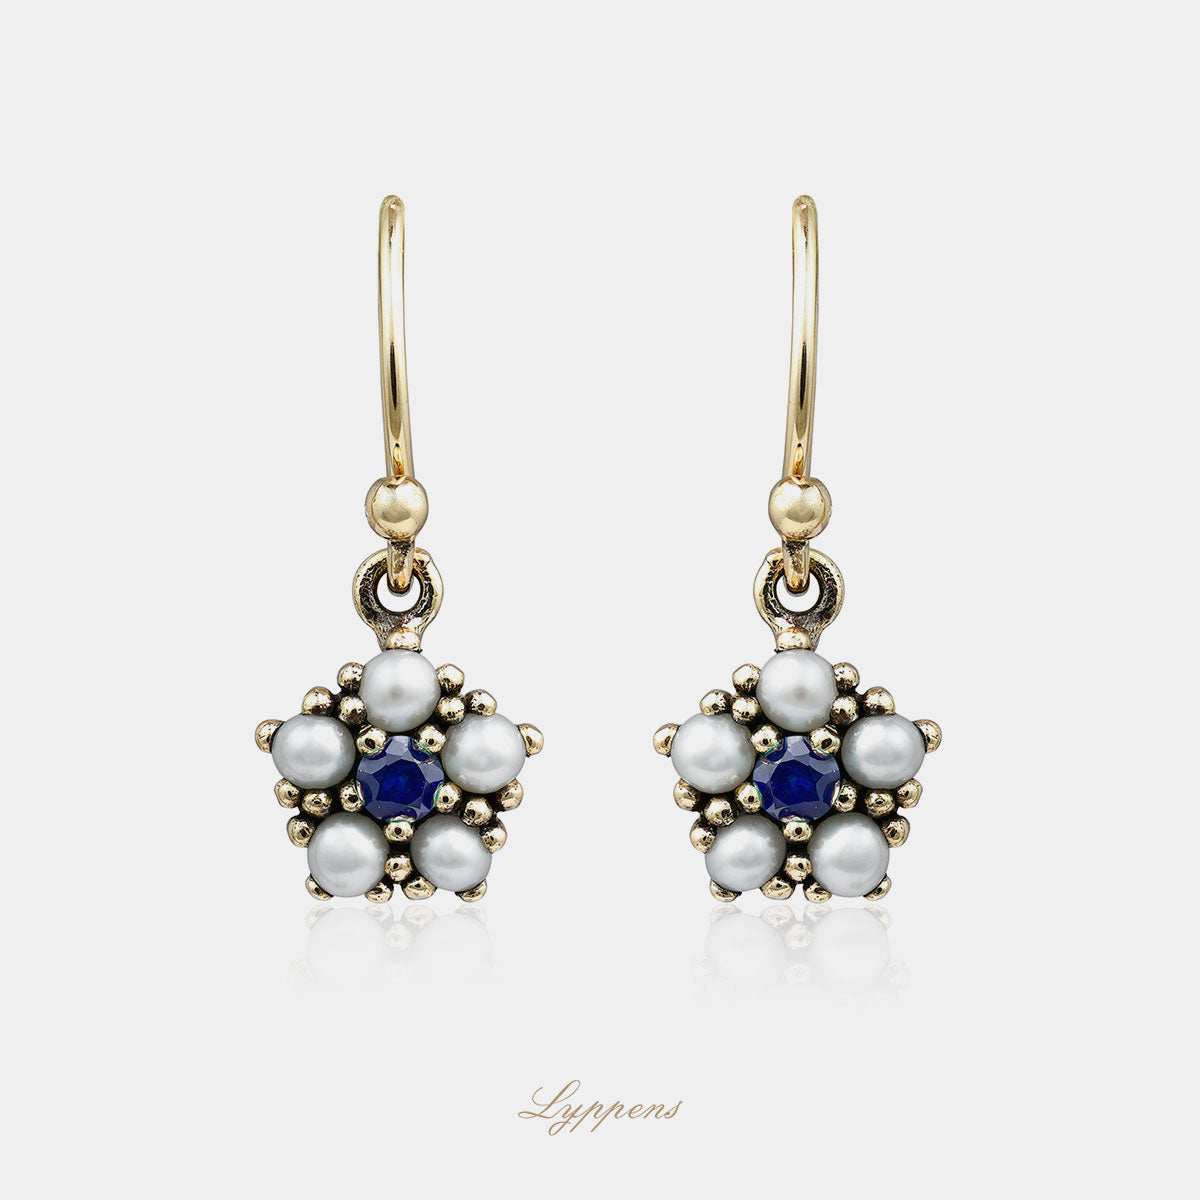 Yellow gold drop earrings with sapphire and pearls